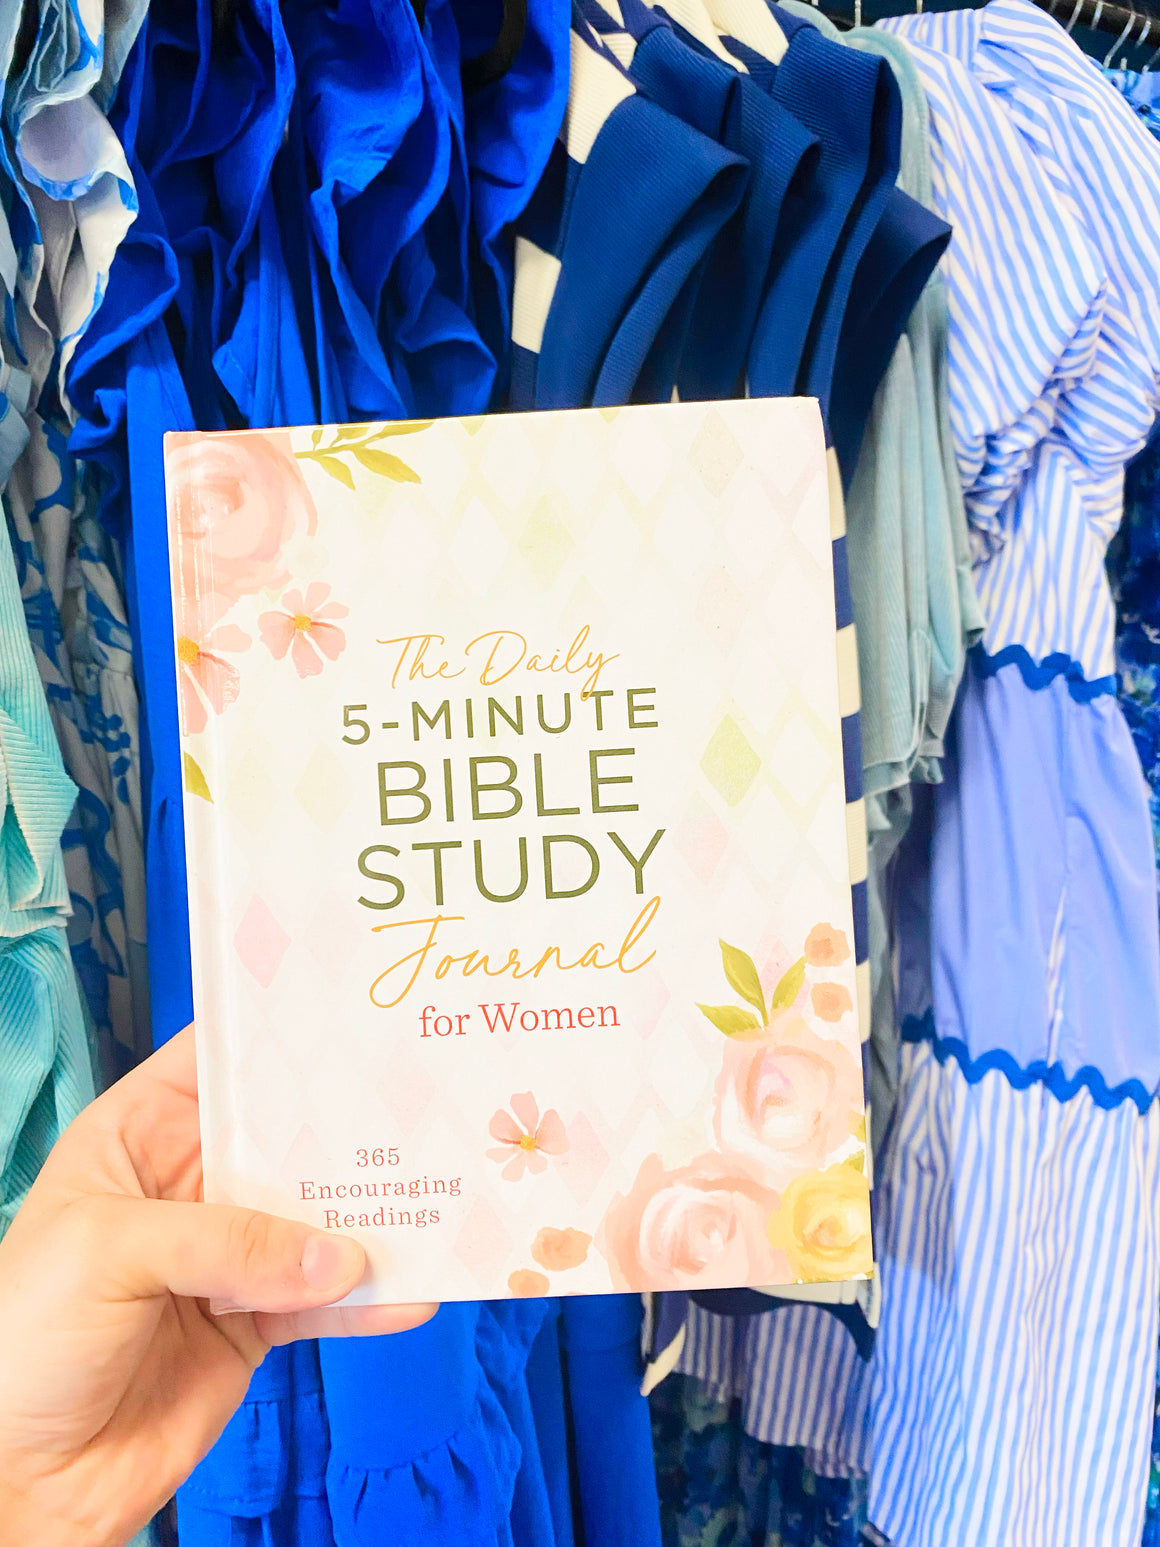 The Daily 5-Minute Bible Study Journal for Women